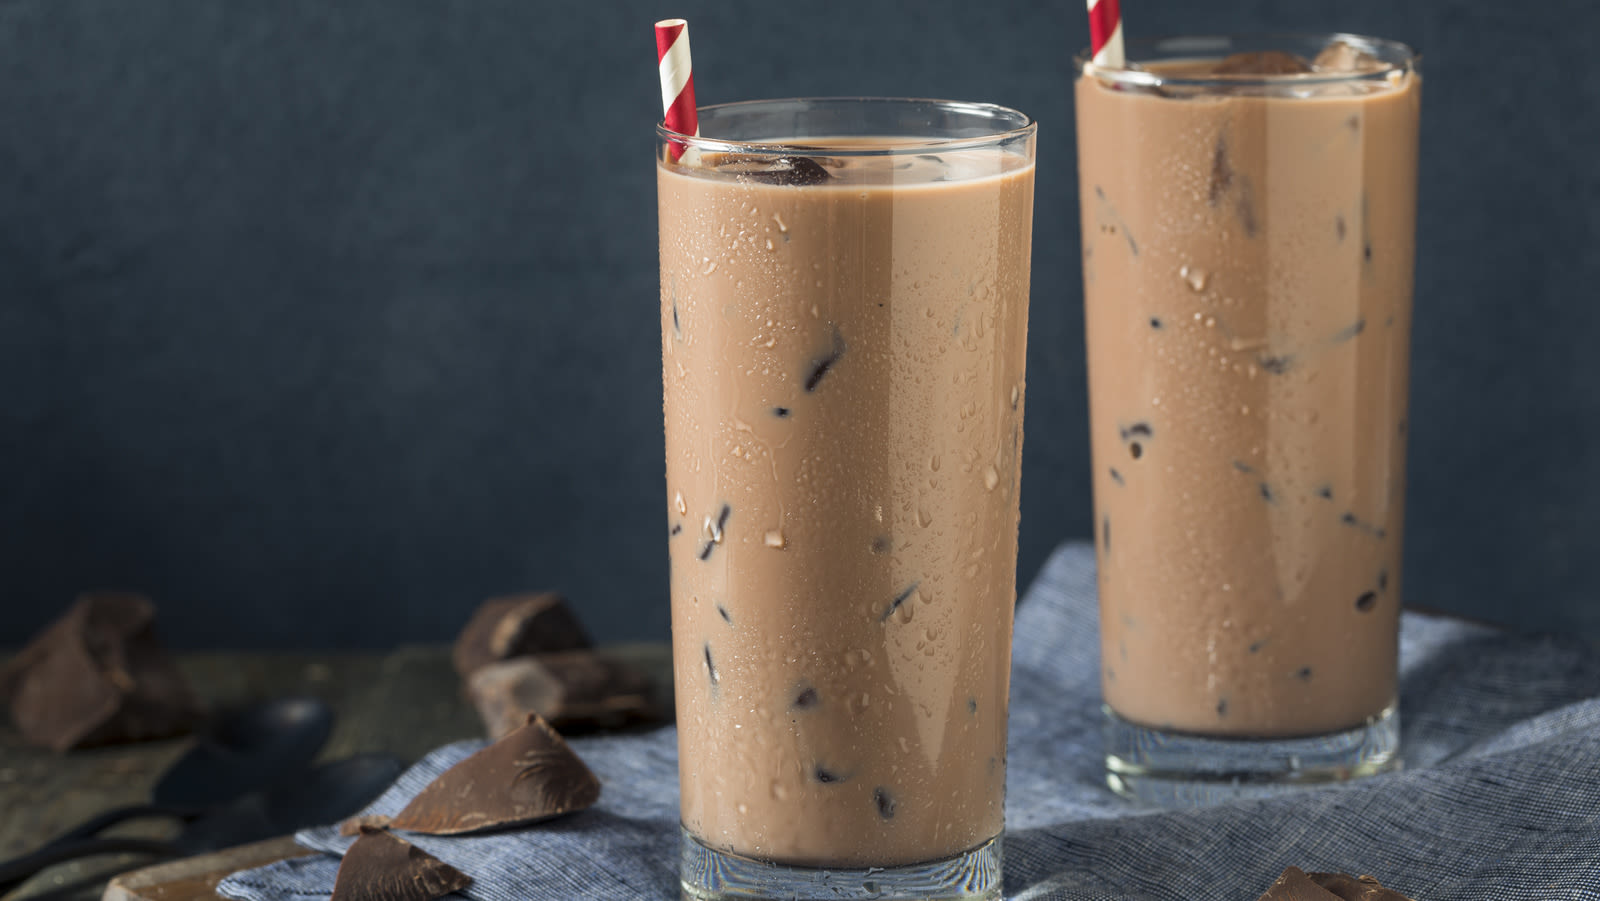 To Best Enjoy Iced Hot Chocolate, Add Cocoa Mix To Your Ice Cubes